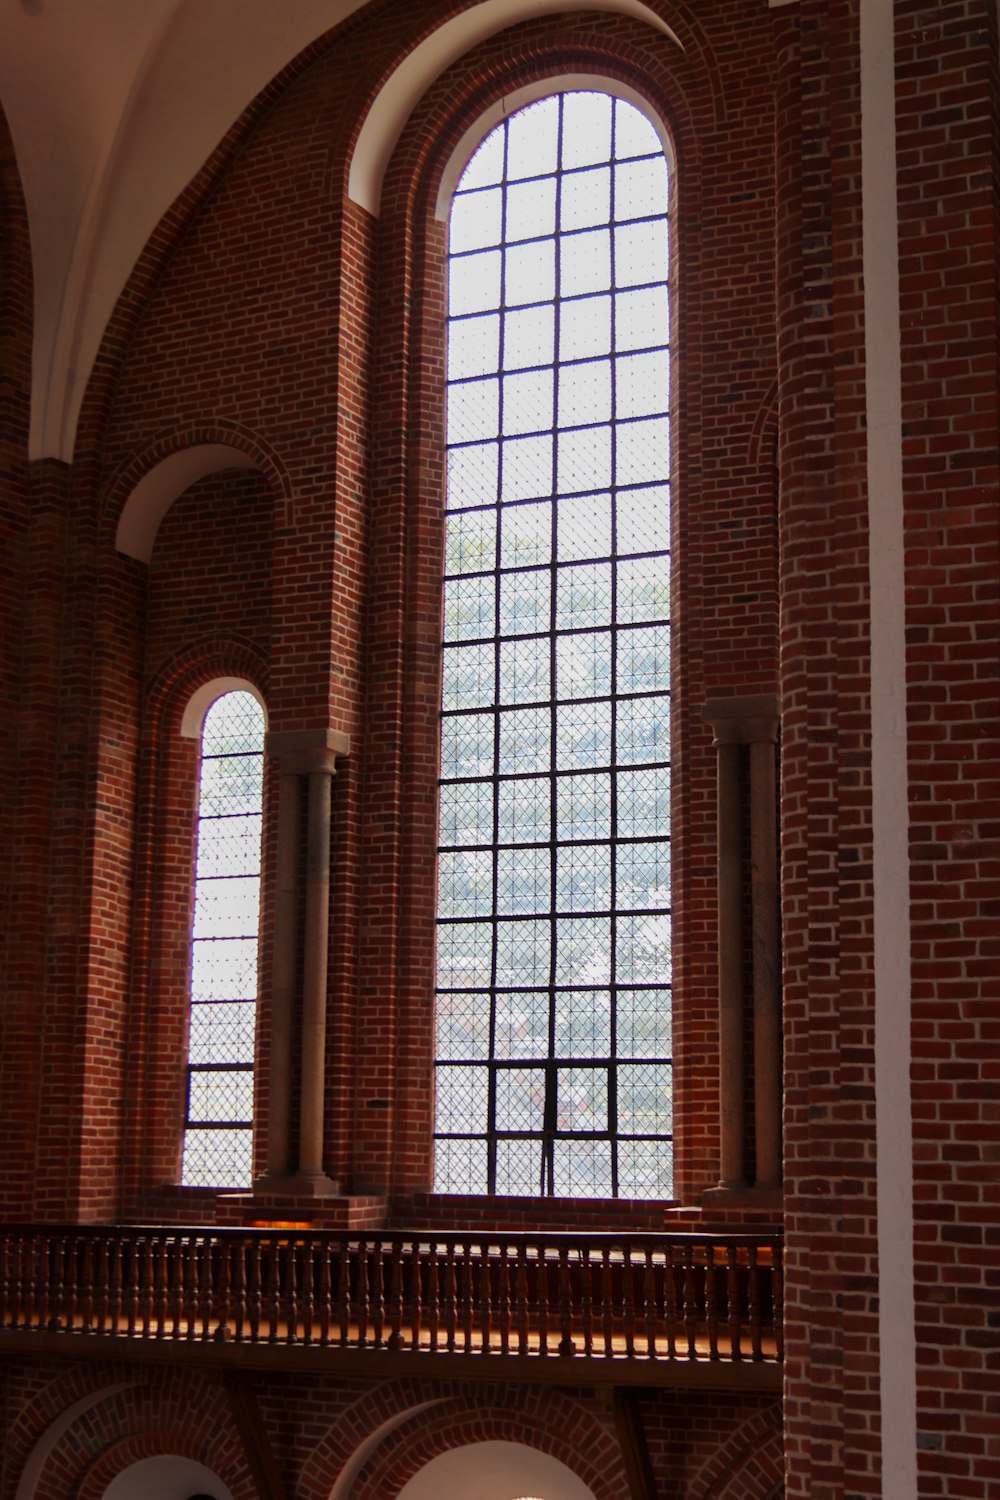 a large window in a brick building with arched windows